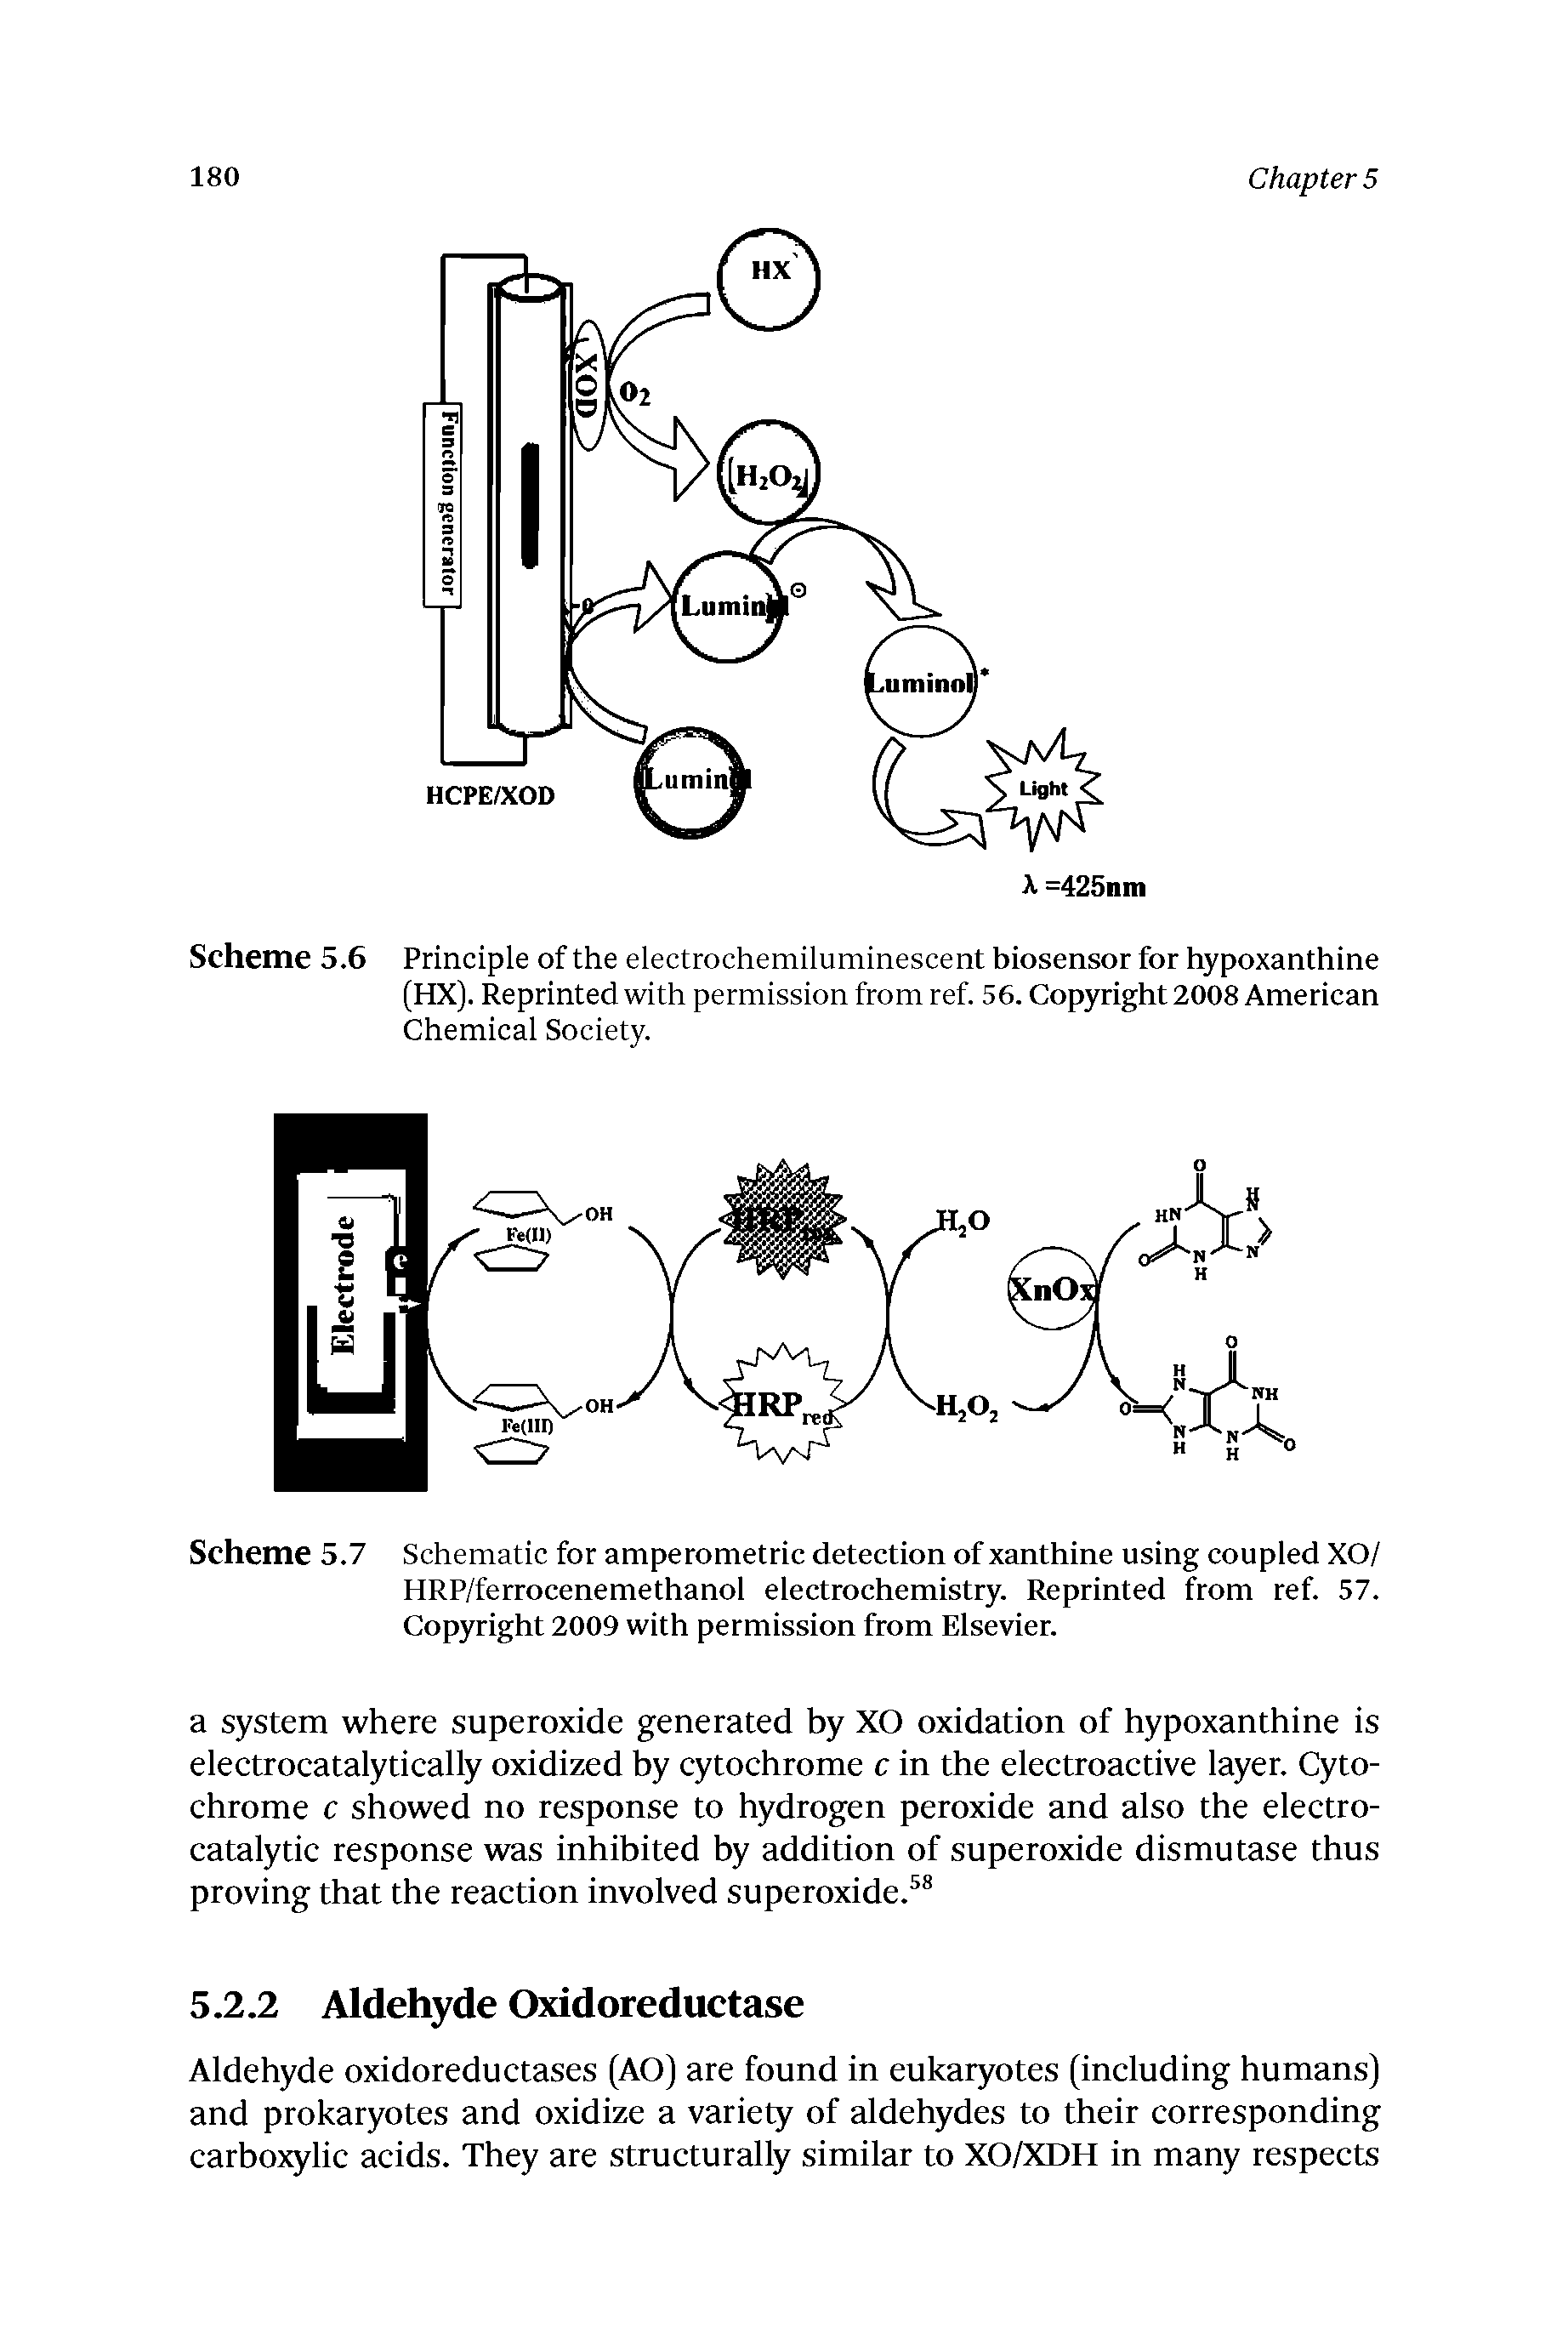 Scheme 5.6 Principle of the electrochemiluminescent biosensor for hypoxanthine (HX). Reprinted with permission from ref. 56. Copyright 2008 American Chemical Society.